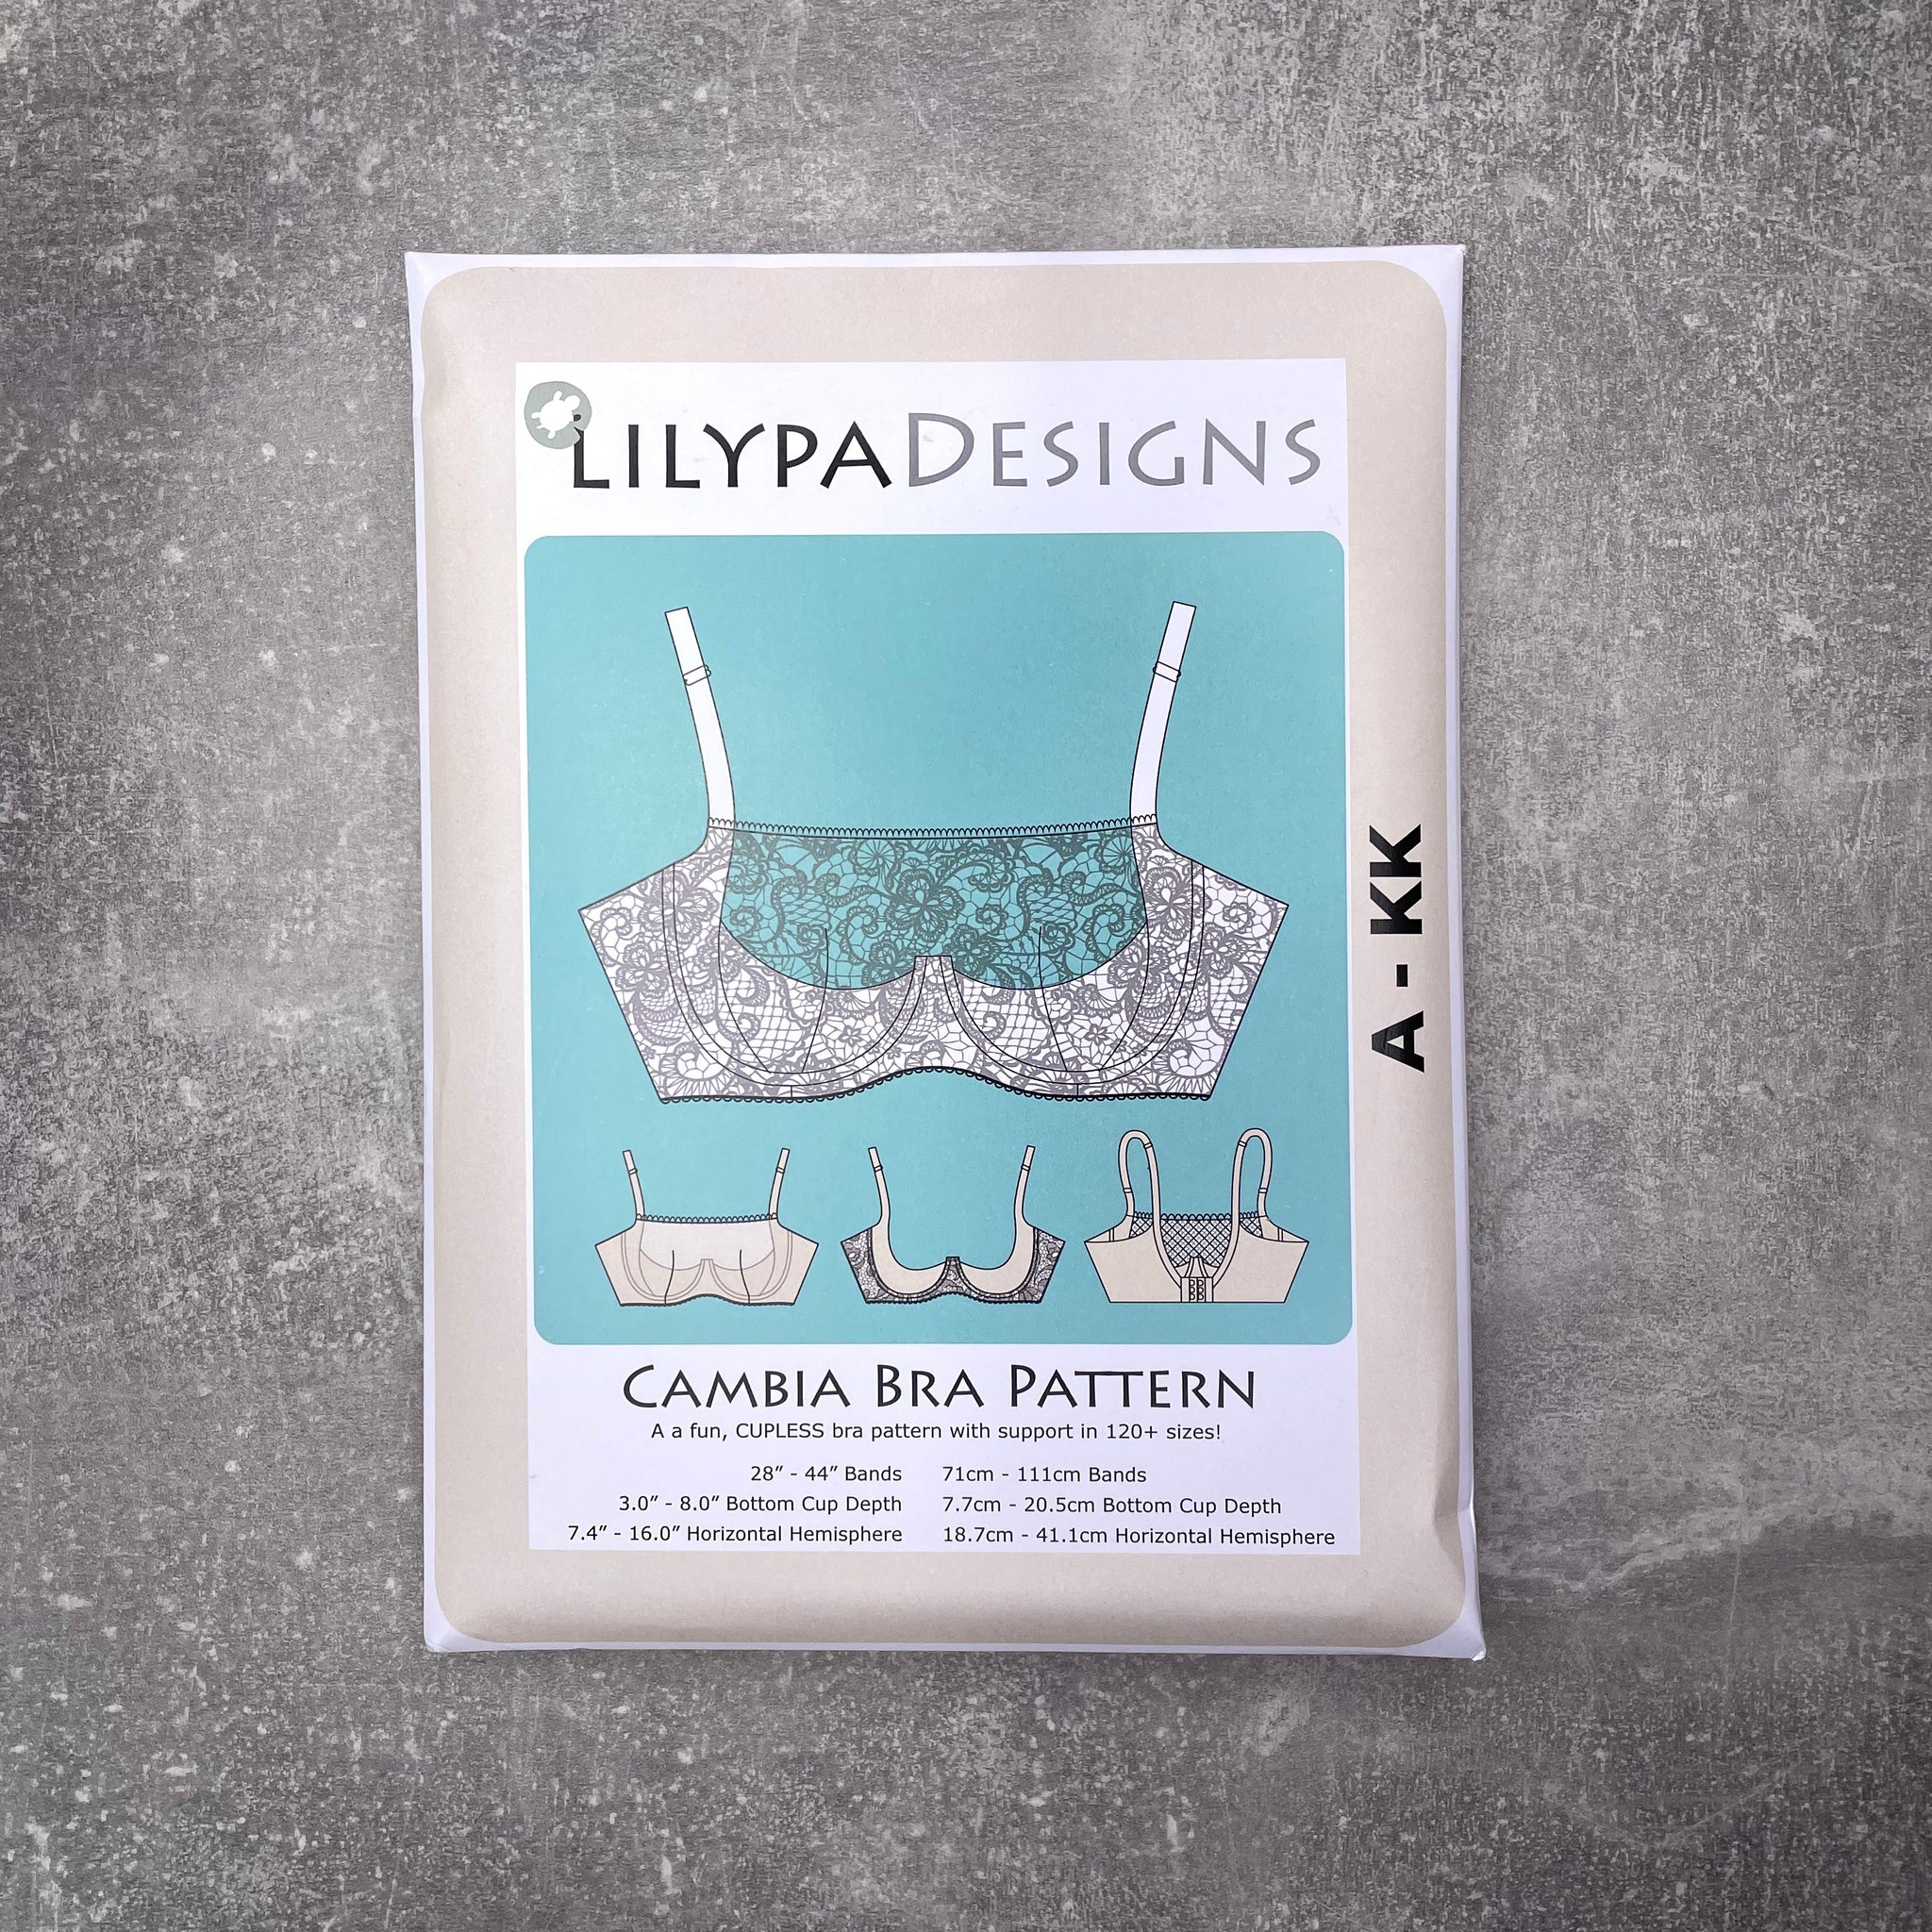 Free Lingerie Sewing Patterns — LilypaDesigns